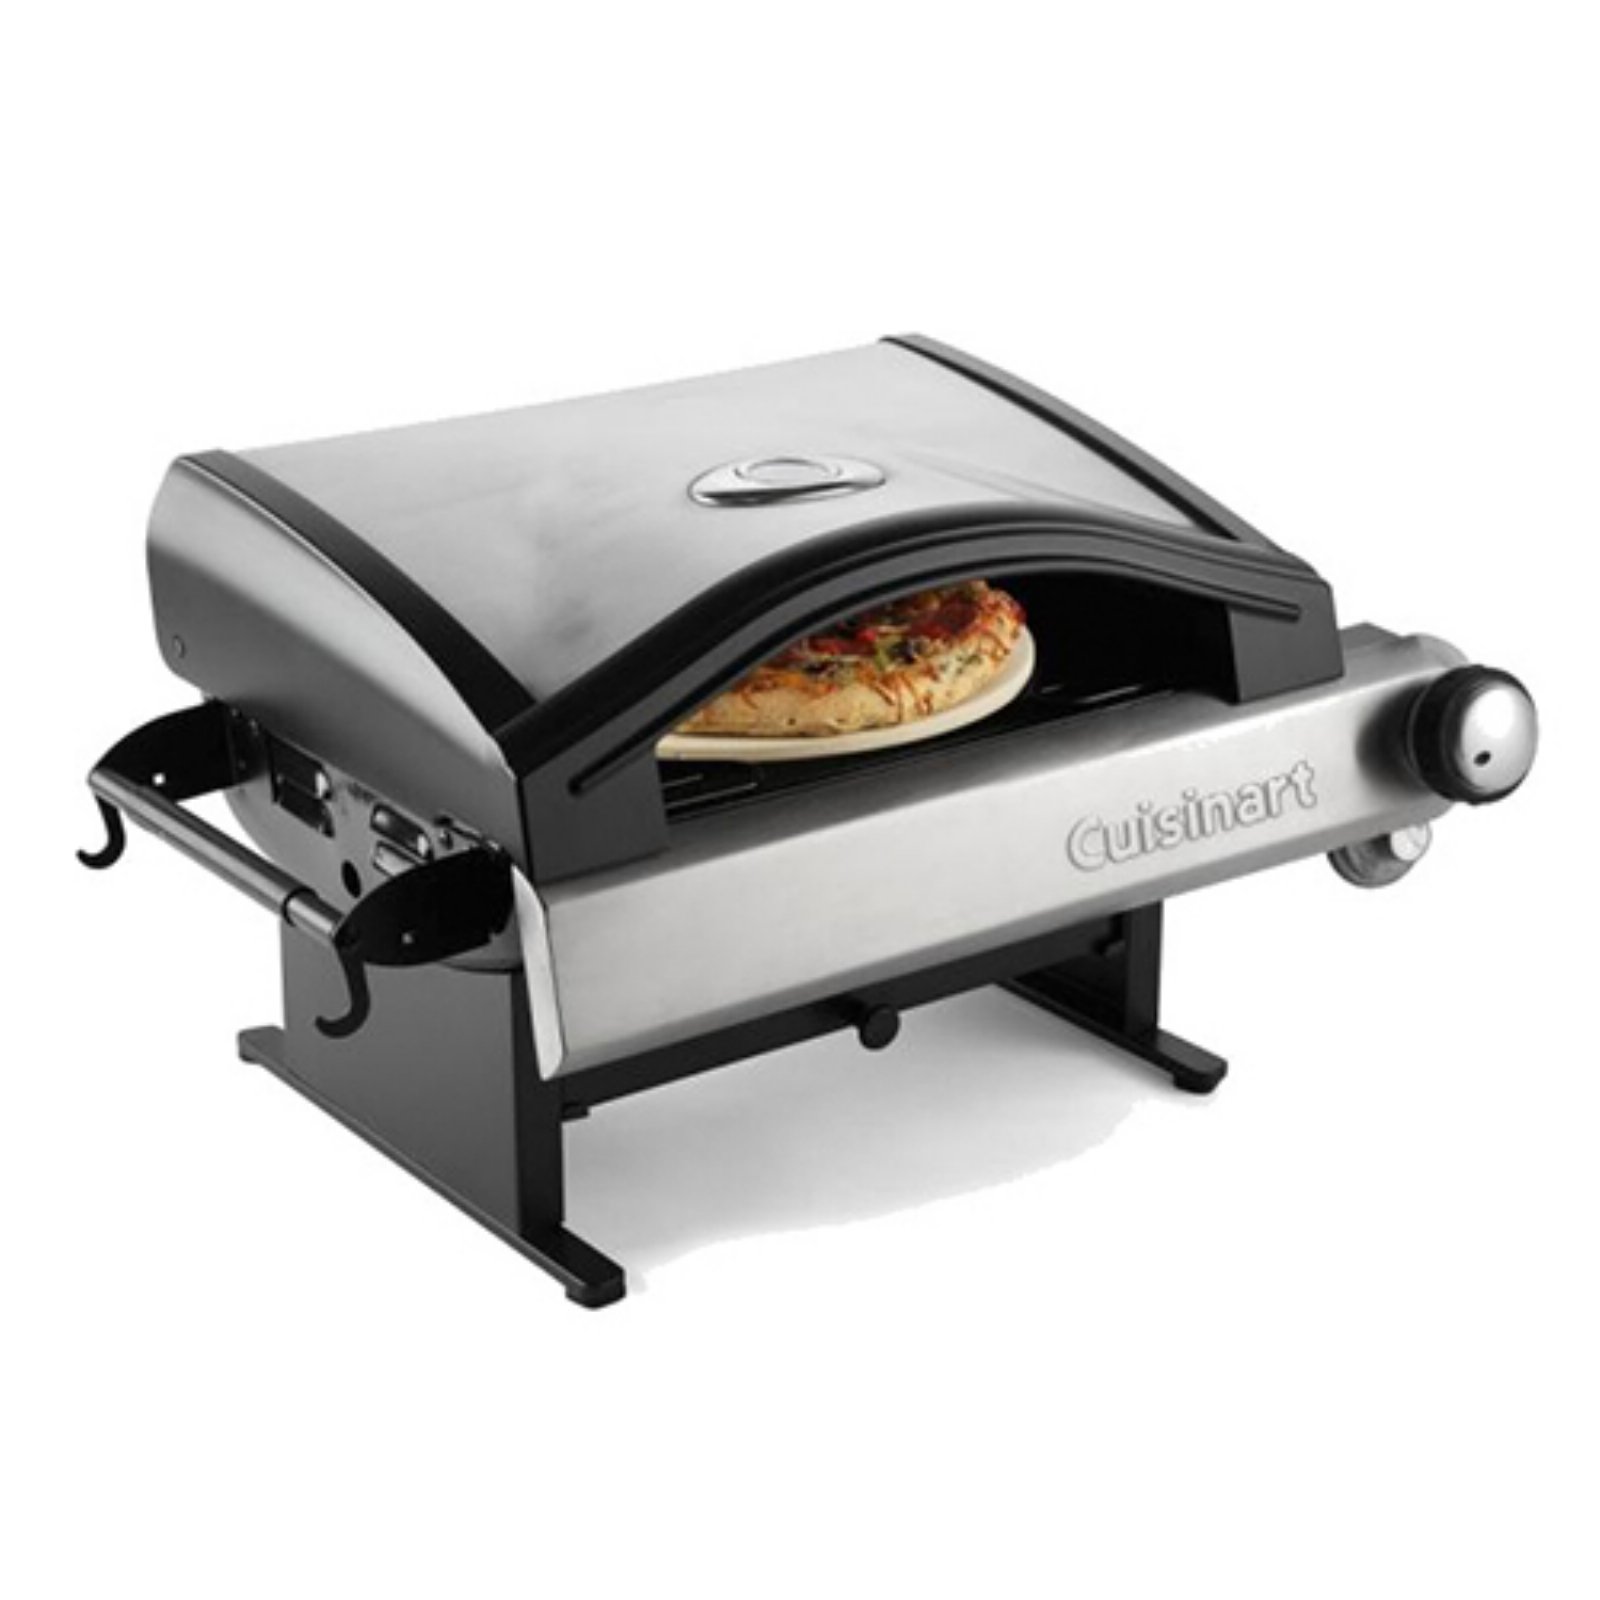 Cuisinart Alfrescamore Outdoor Pizza Oven with Accessories - image 1 of 7